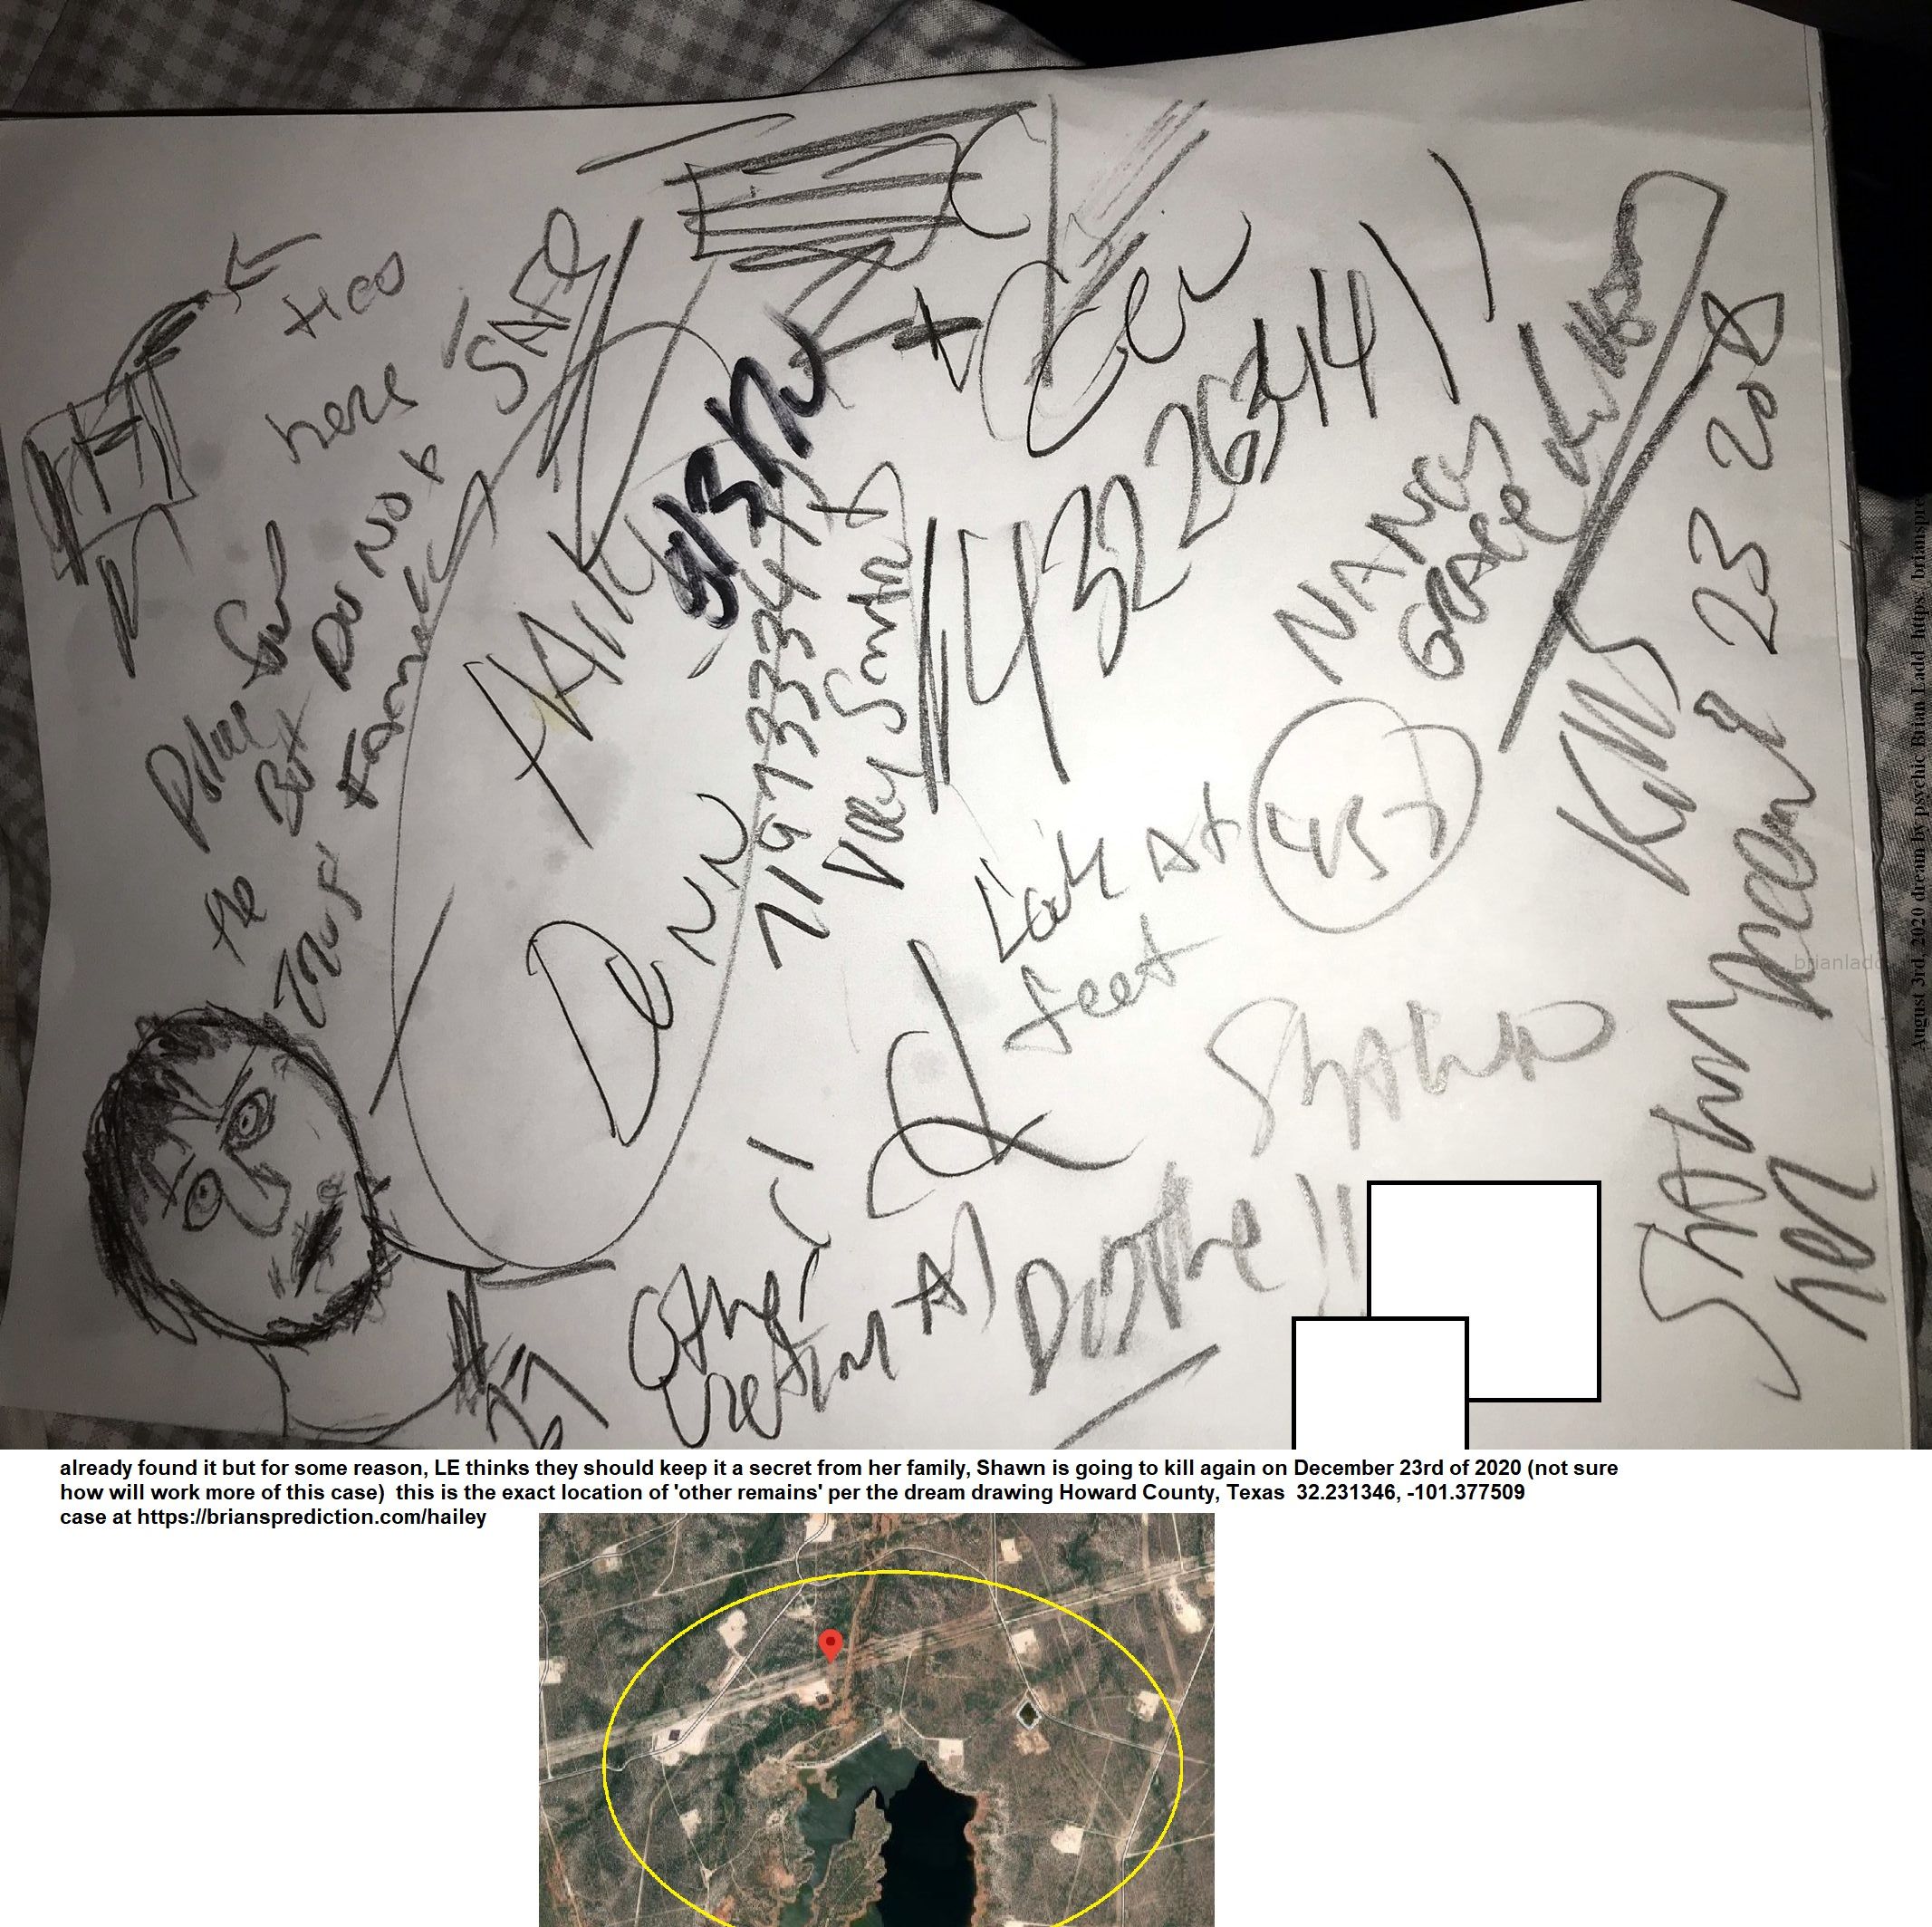 Hailey Dunn Shawn Adkins Left It There And He Tried To Move It Shawn Arrested For Murder 432263441 New Case - Hailey Dun...
Hailey Dunn,  Shawn Adkins Left It There And He Tried To Move It, Shawn Arrested For Murder,  4322634411, This Is The Item He Is Going Back For, But Police Have Already Found It But For Some Reason, Le Thinks They Should Keep It A Secret From Her Family, Shawn Is Going To Kill Again On December 23rd Of 2020 (not Sure How Will Work More Of This Case)  This Is The Exact Location Of 'other Remains' Per The Dream Drawing  Howard County, Texas  32.231346, -101.377509  Case At   https://briansprediction.com/Hailey  News  Thirteen-Year-Old Hailey Darlene Dunn Vanished On December 27th, 2010 From Her Colorado City, Texas Home. She Left To Go To Her Dad'S Close By, But The 13-Year-Old Never Arrived. Her Scent Was Tracked Halfway To Her Dad'S House And Also To A Hotel. It Was Also Found That She May Only Be Wearing Flip Flops If Any Shoes At All. Her Mother'S Boyfriend Had Taken A Polygraph Test. Police Have Also Searched The Home And A Back Shed. Police Are Not Saying What If Anything Was Found. Police Are Also Not Saying Whether The Boyfriend Passed The Polygraph Or Not. Colorado City Police Have Said They Believe Hailey Was Last Seen December 27 At 3:15 P.M. In Her House In The 1800 Block Of Chestnut. Colorado City Is 75 Miles North Of San Angelo. Her Remains Were Found In 2013 And Were Identified A Month Later.  Hailey Is About 5'0 Tall, Weighs 120 Pounds, And Has Brown Hair. She Was Last Seen Wearing Navy Blue Sweatpants, A Light-Colored Short-Sleeve T-Shirt And Pink And White Tennis Shoes.
